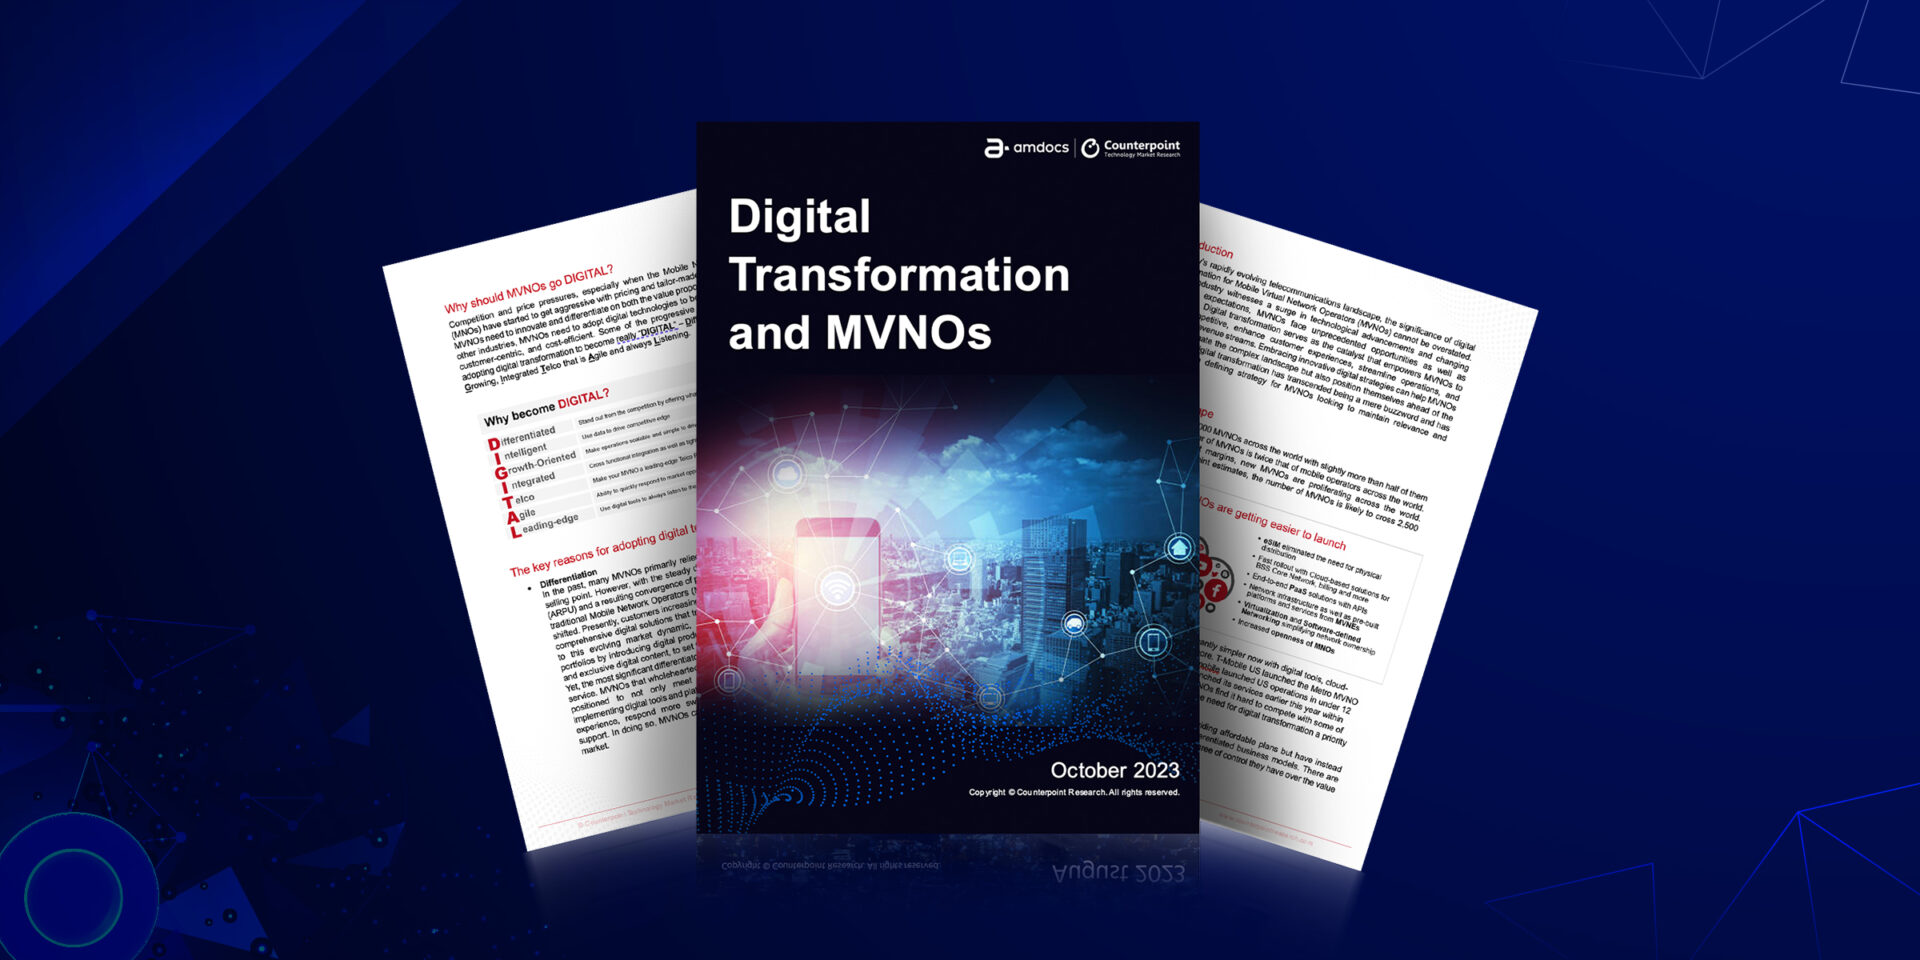 A White Paper on Digital Transformation and MVNOs